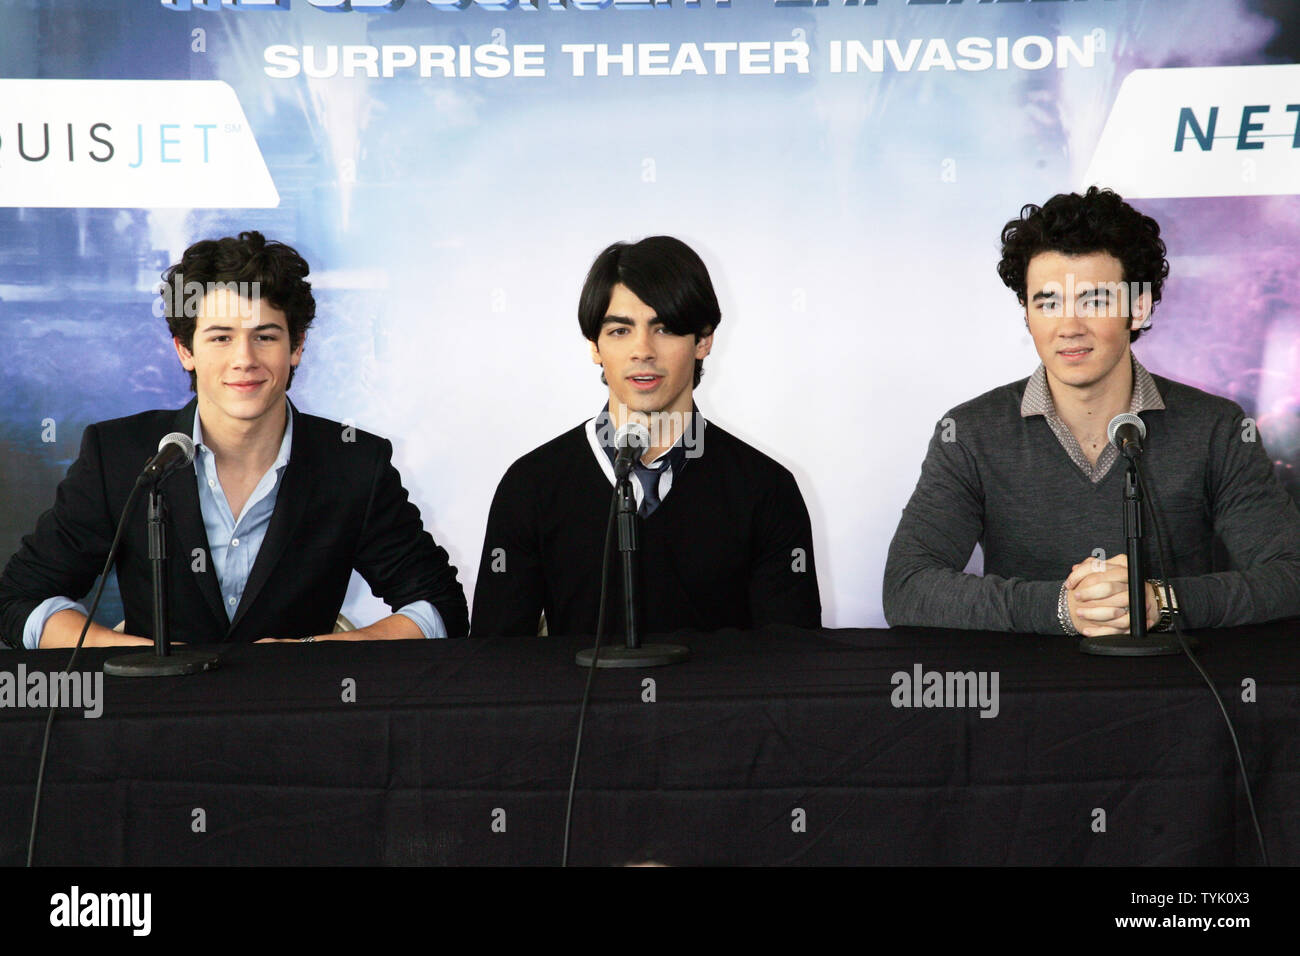 The Jonas Brothers (L-R) Nick, Joe and Kevin attend a press conference about embarking on their 'Surprise Theater Invasion' at the Westchester Airport in New York on February 28, 2009.  (UPI Photo/Laura Cavanaugh) Stock Photo